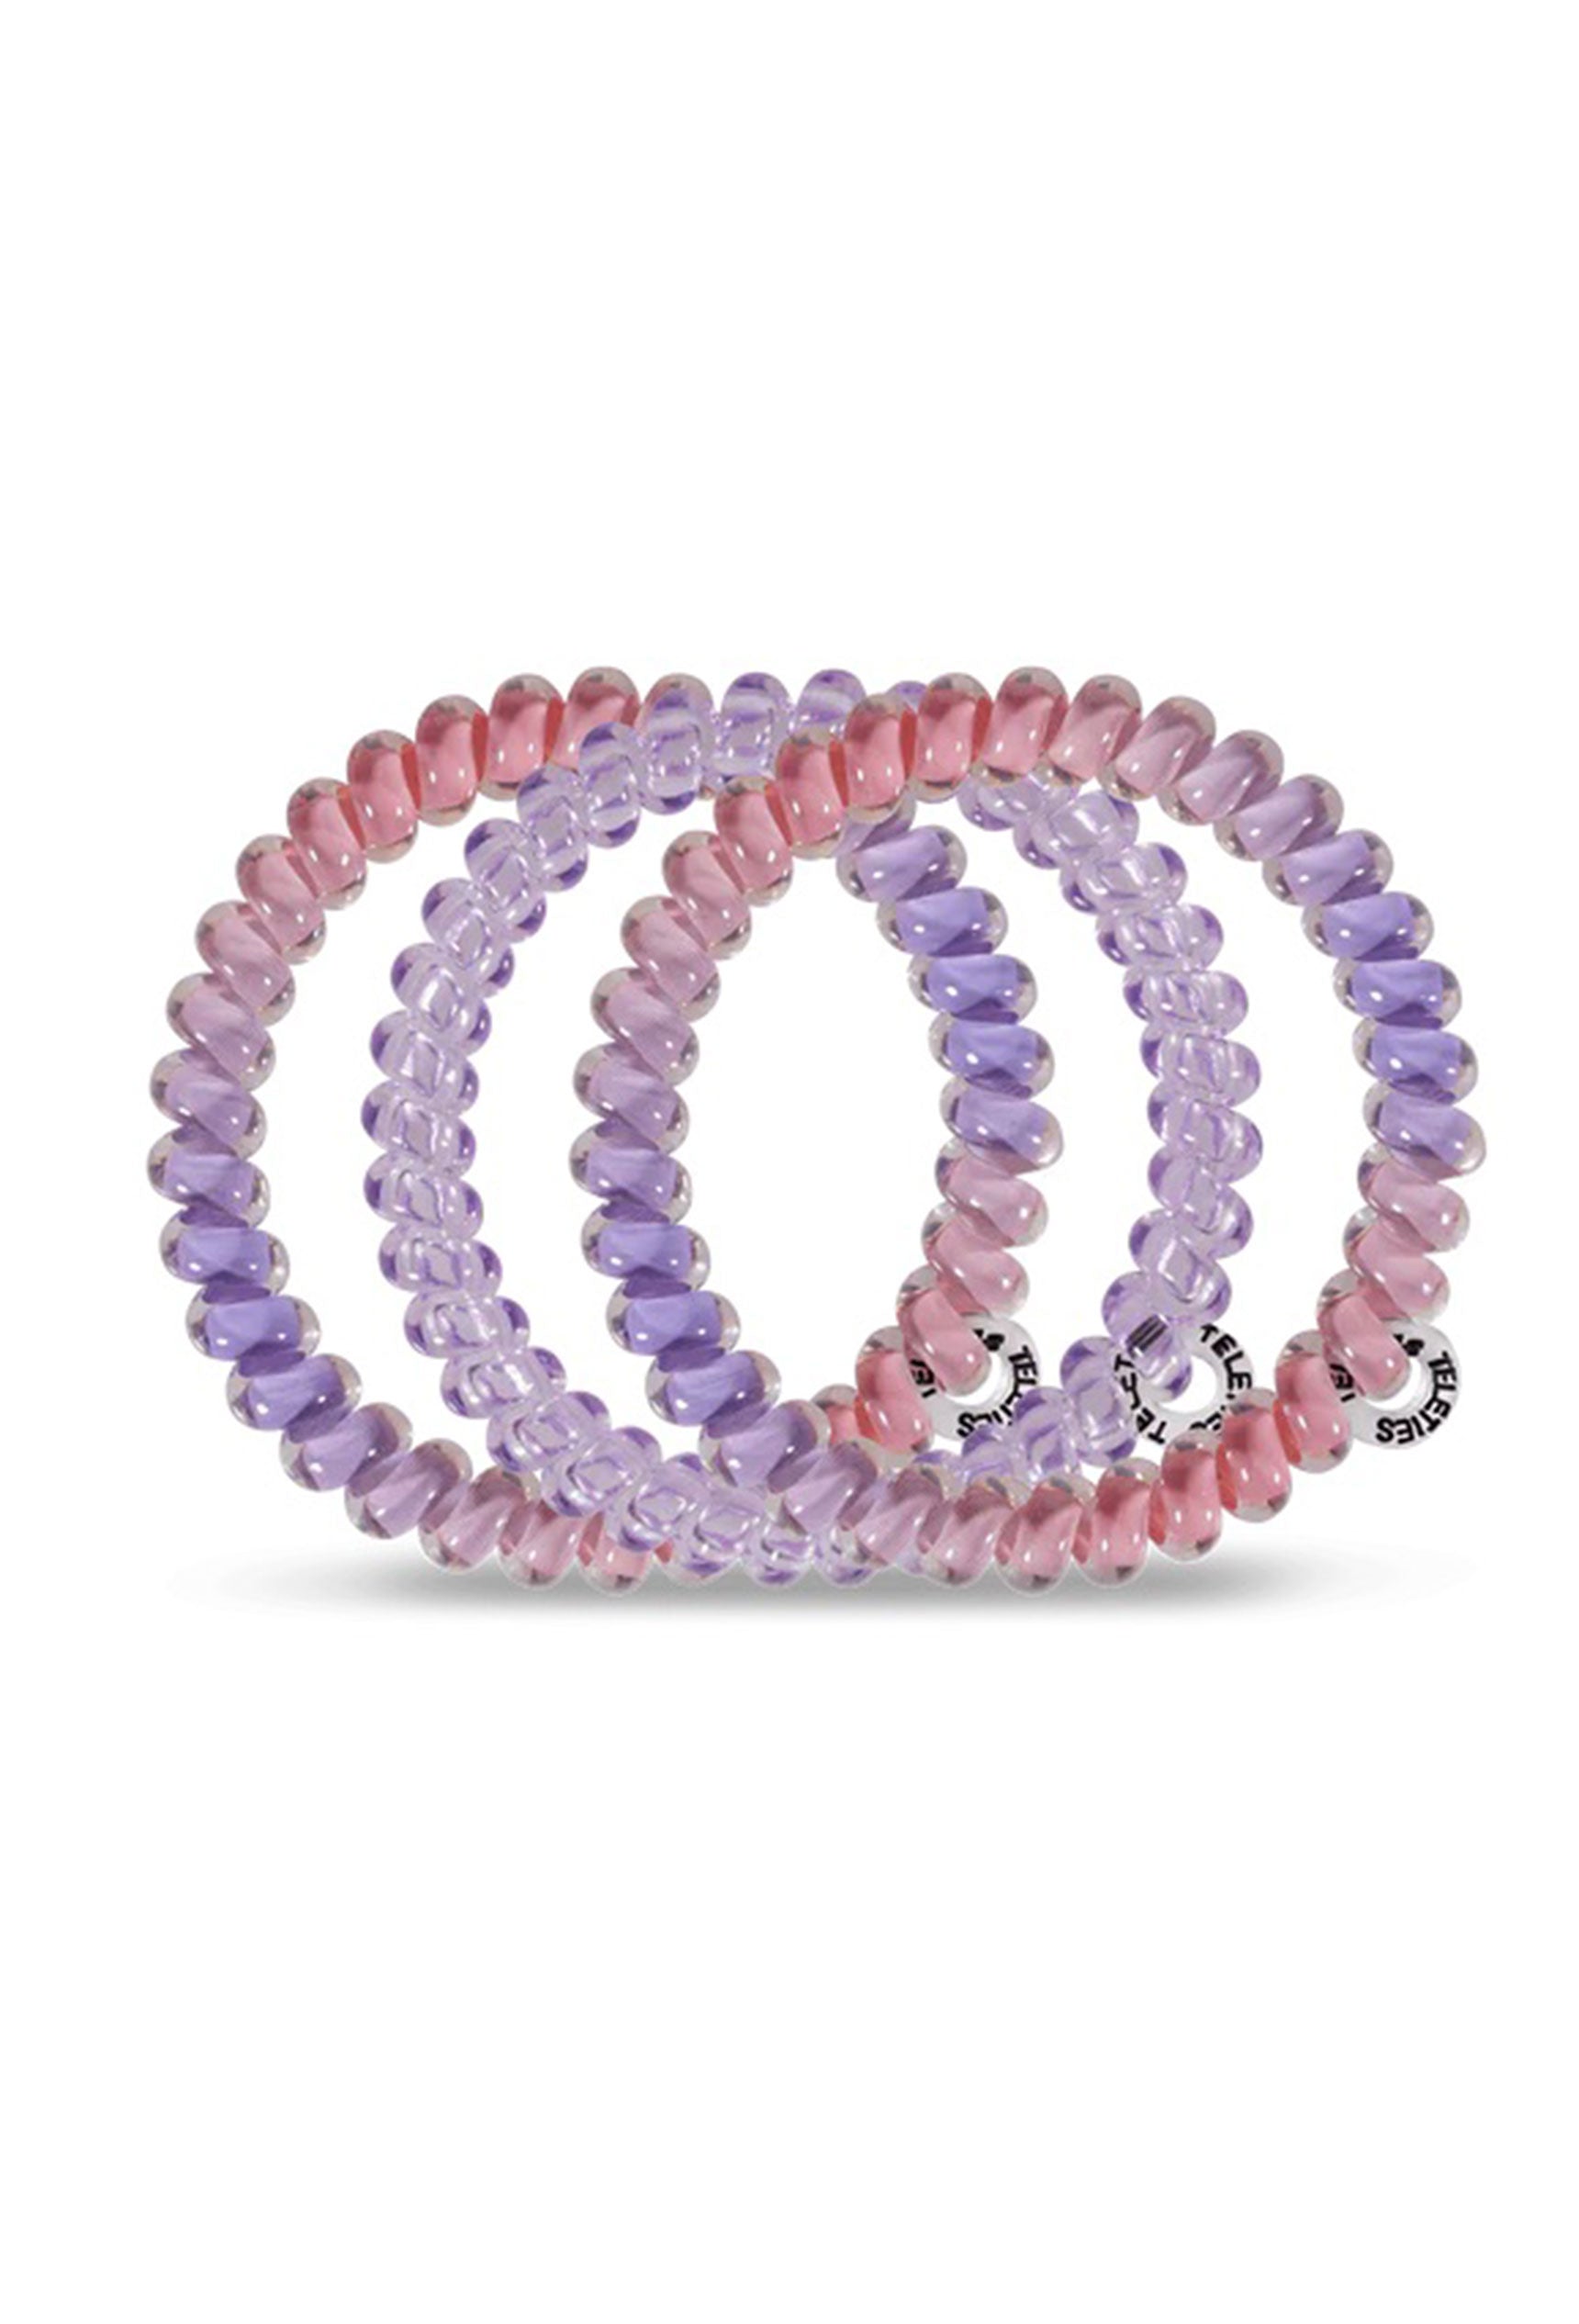 TELETIES Large Hair Ties - Cotton Candy Sky, set of 3 hair coils, purple and pink